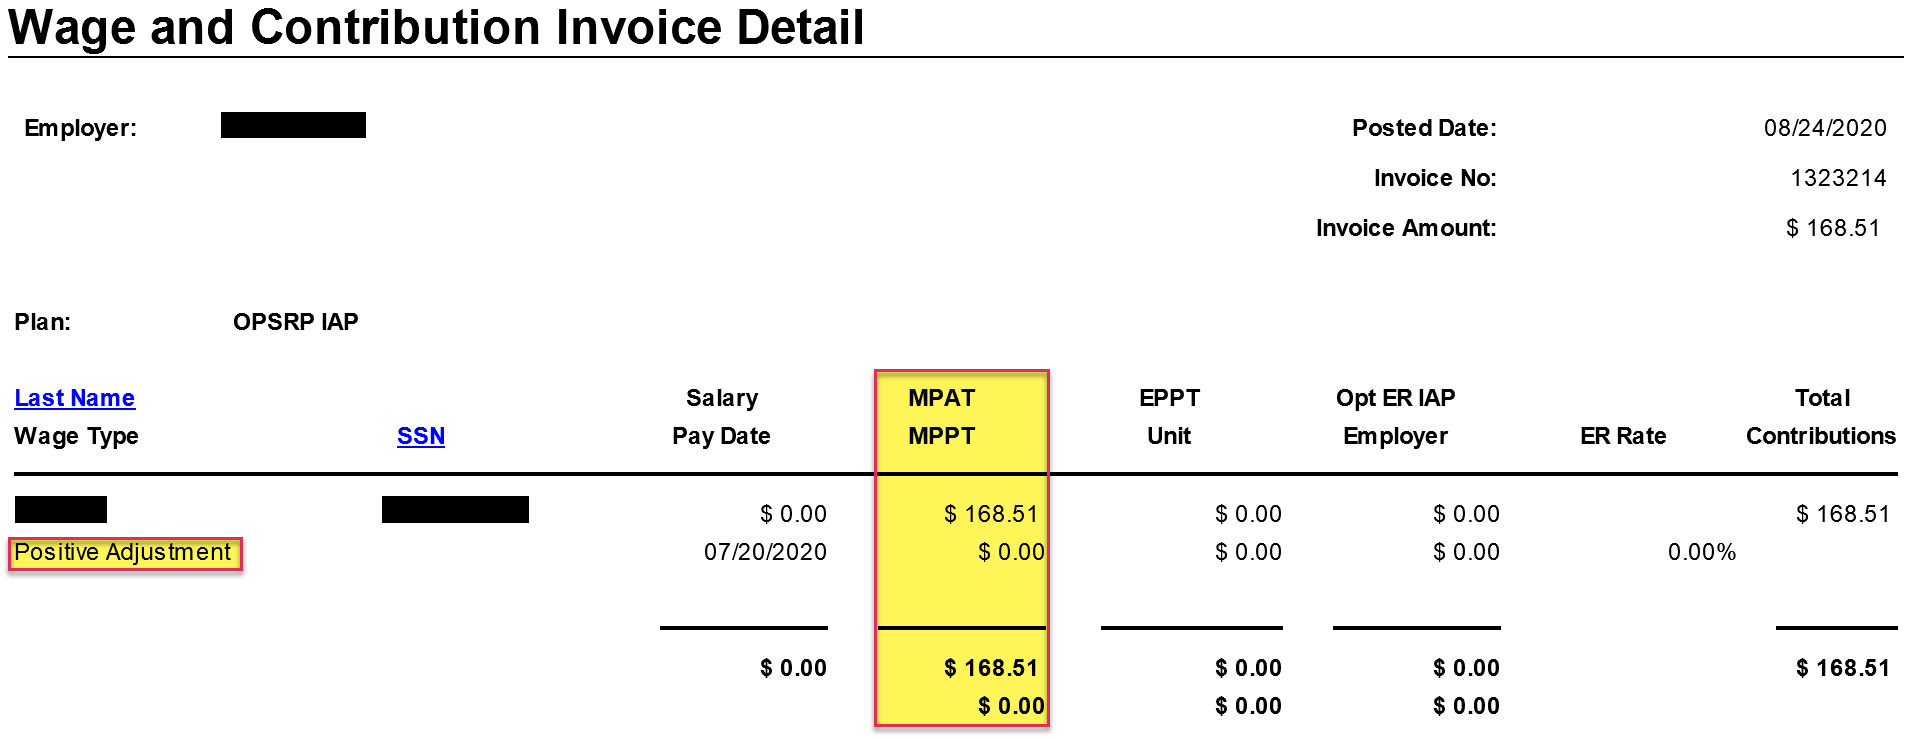 Wage and Contribution Invoice Detail.png